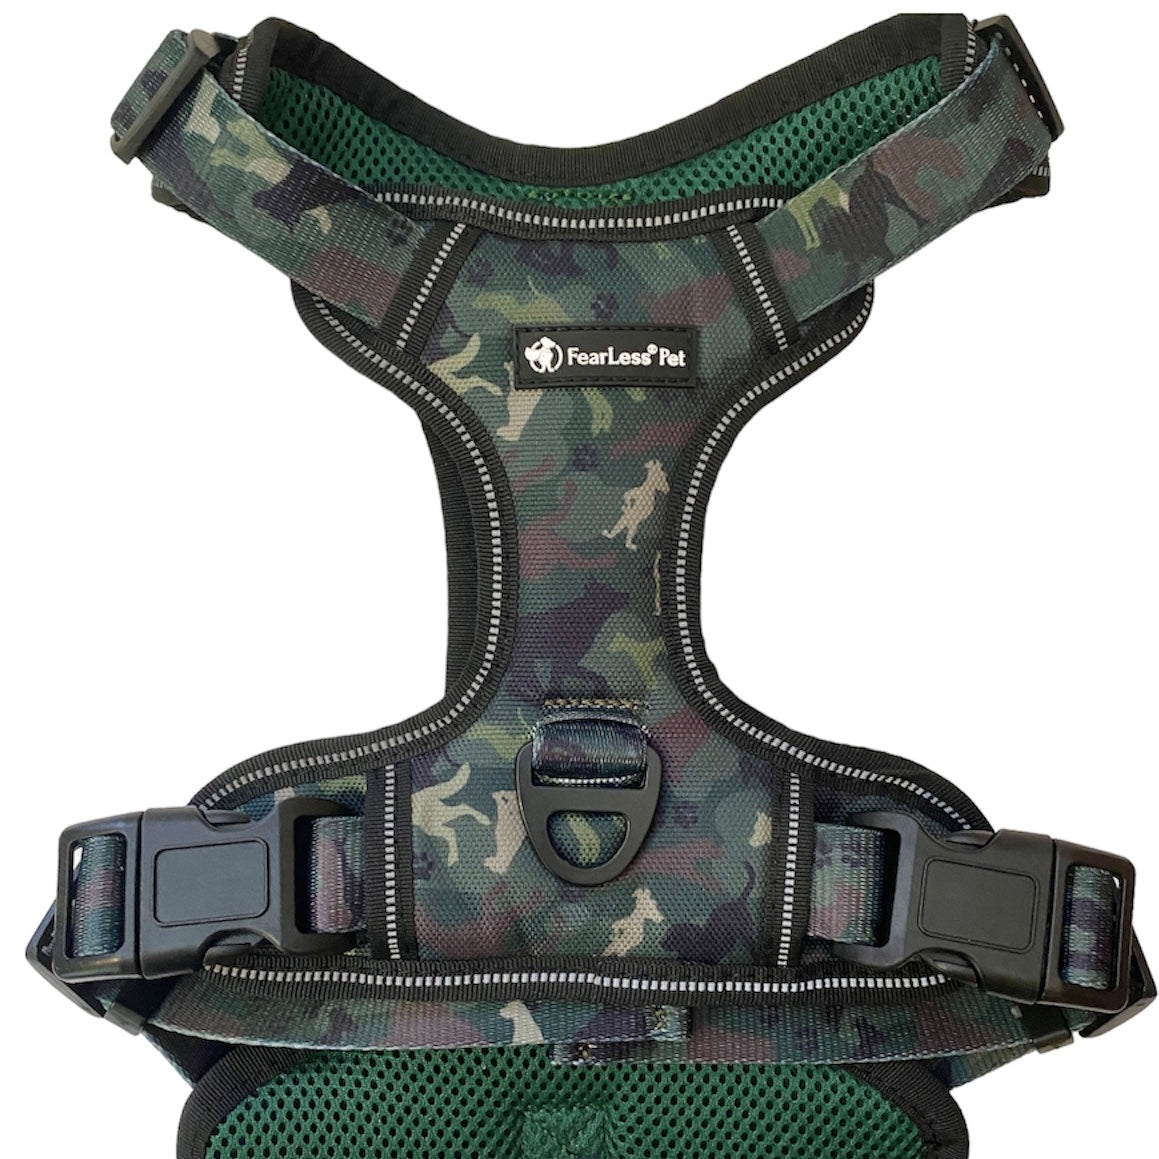 back view photo of a green camo harness on a white background